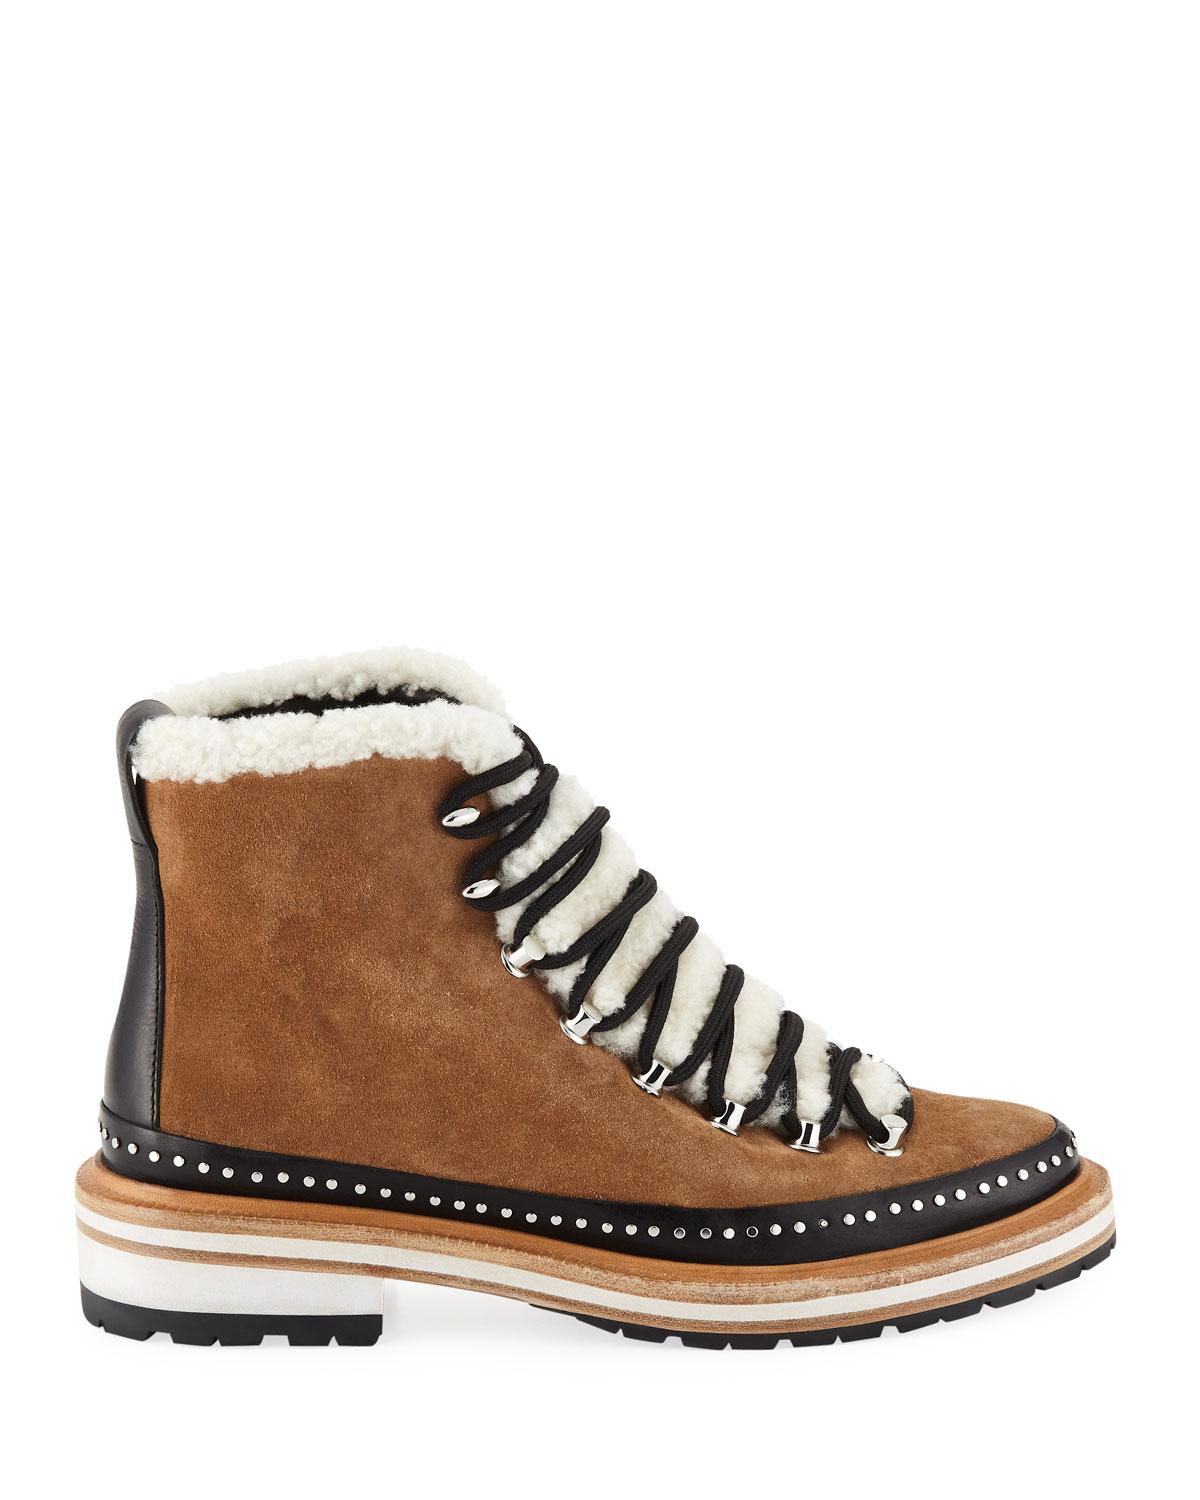 Rag & Bone Compass Shearling-trimmed Ankle Boots in Brown - Lyst